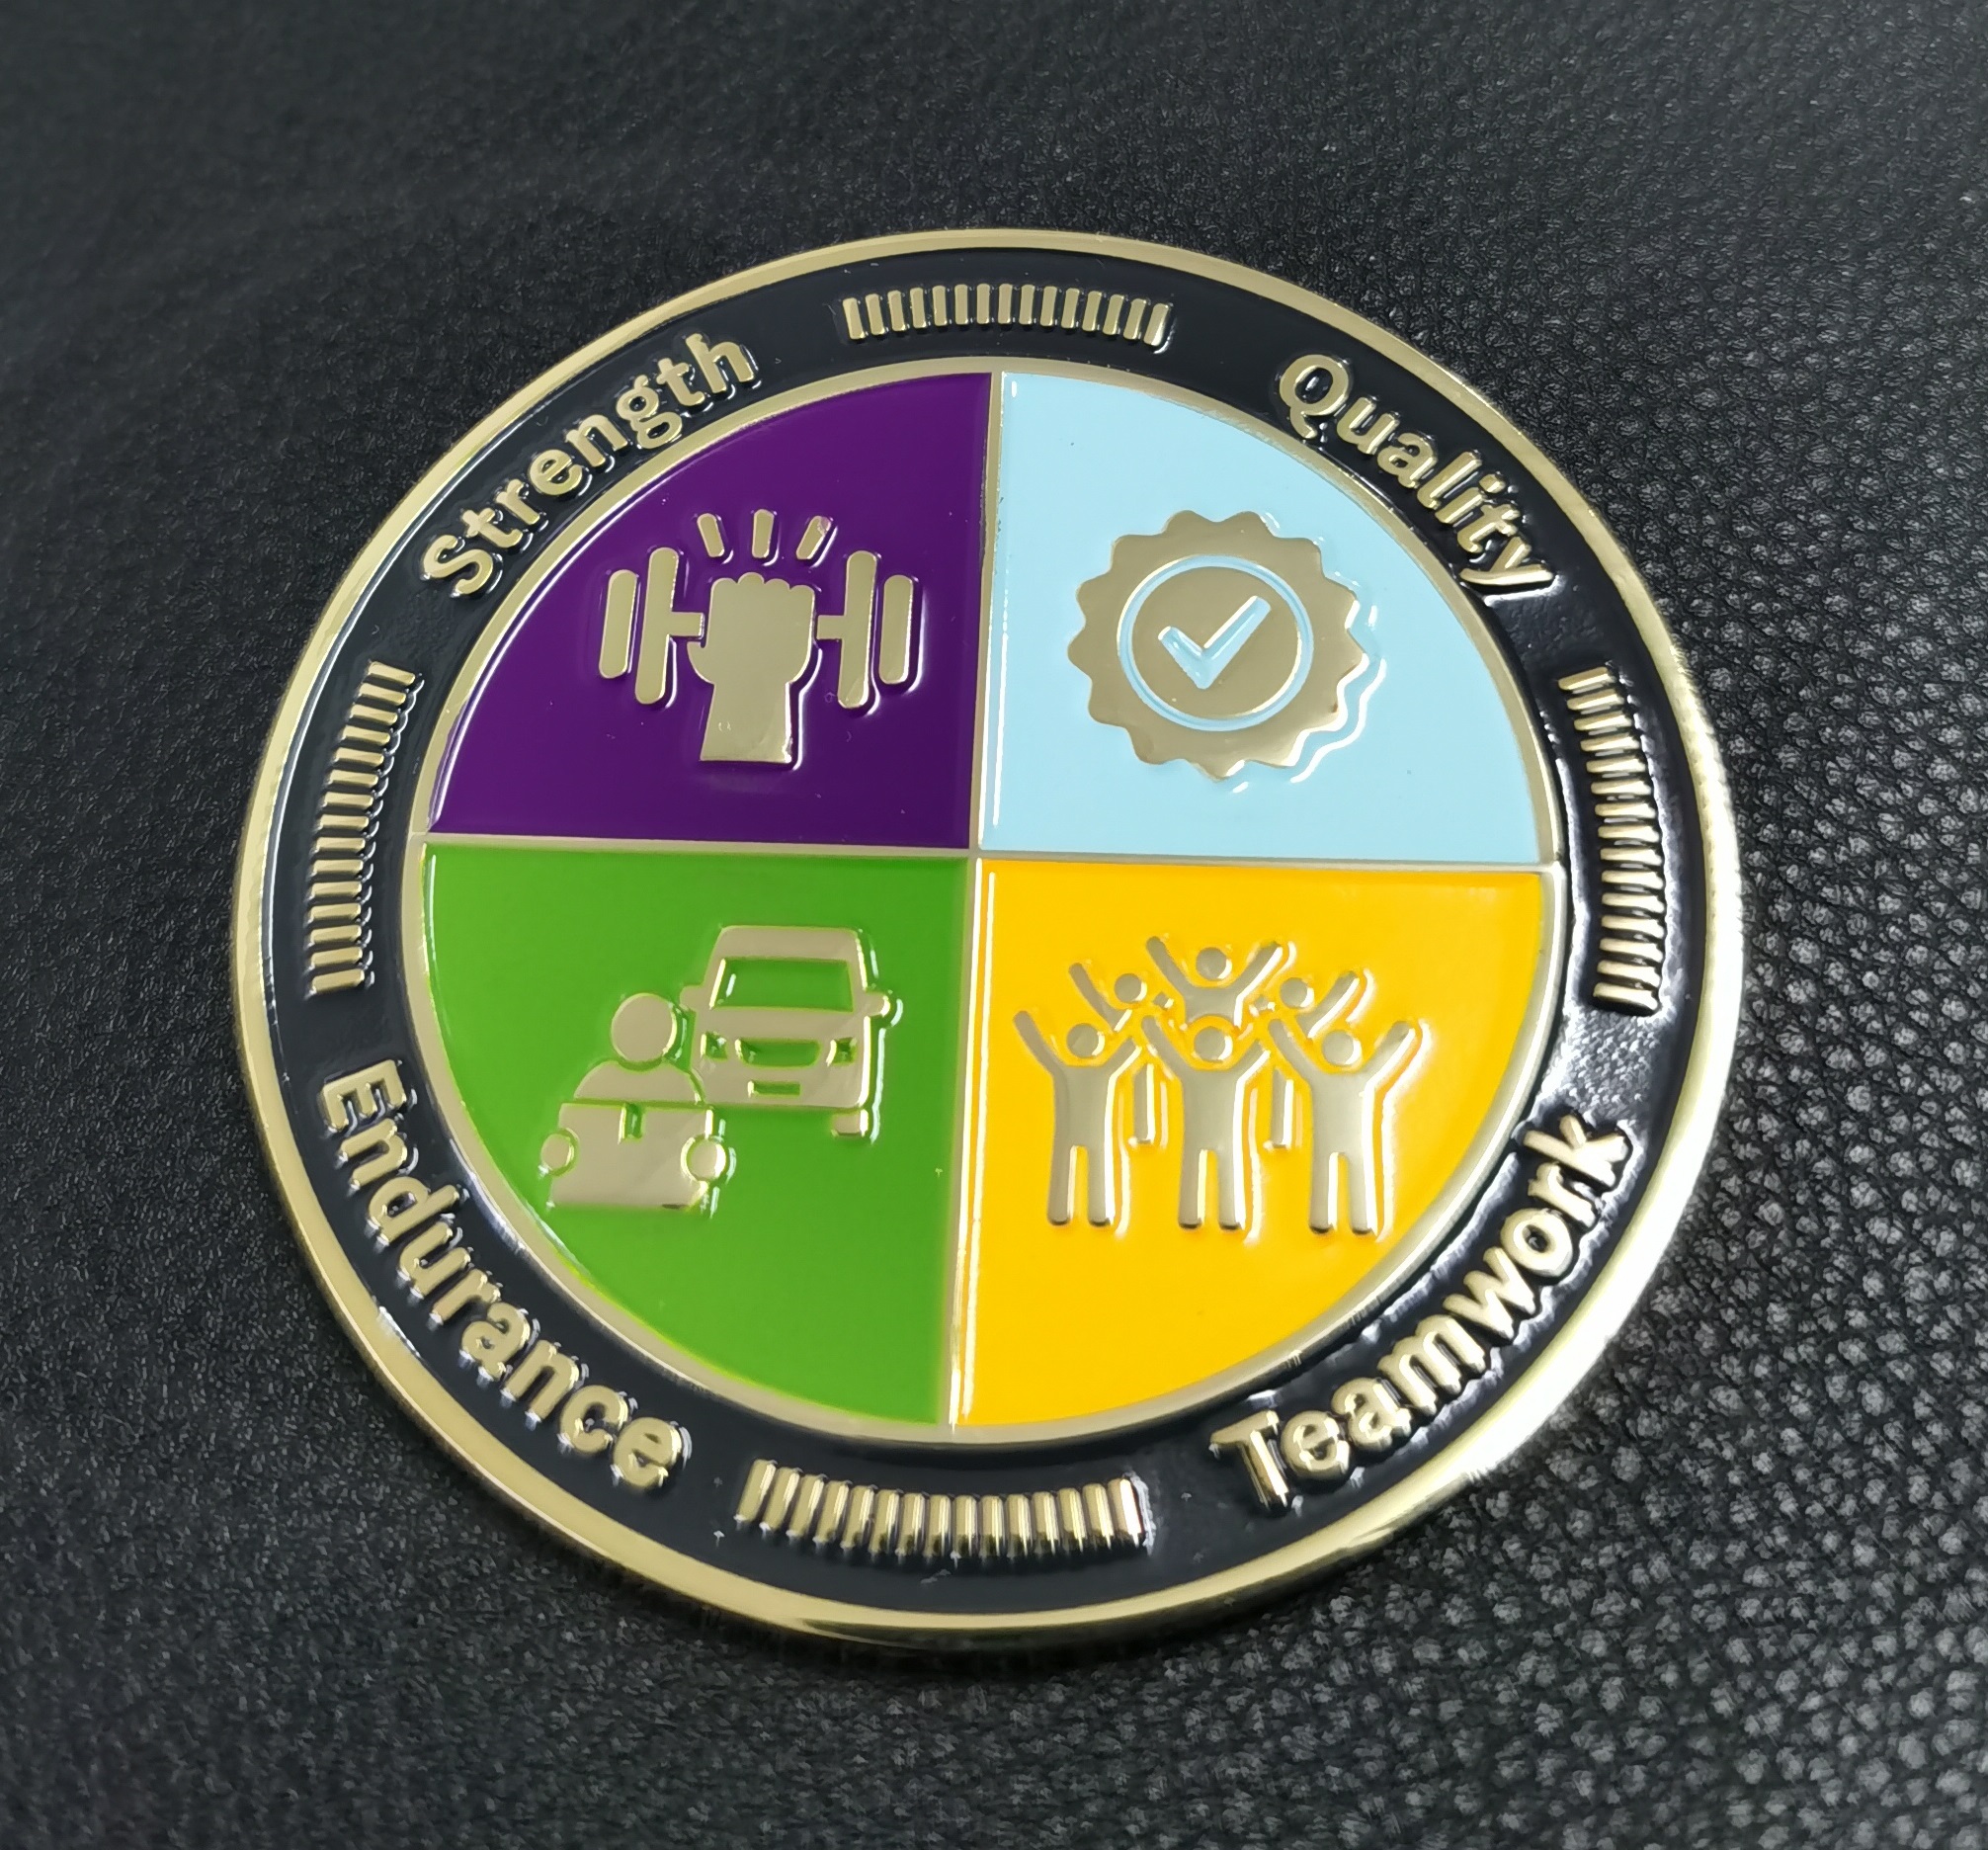 Company Values Challenge Coin